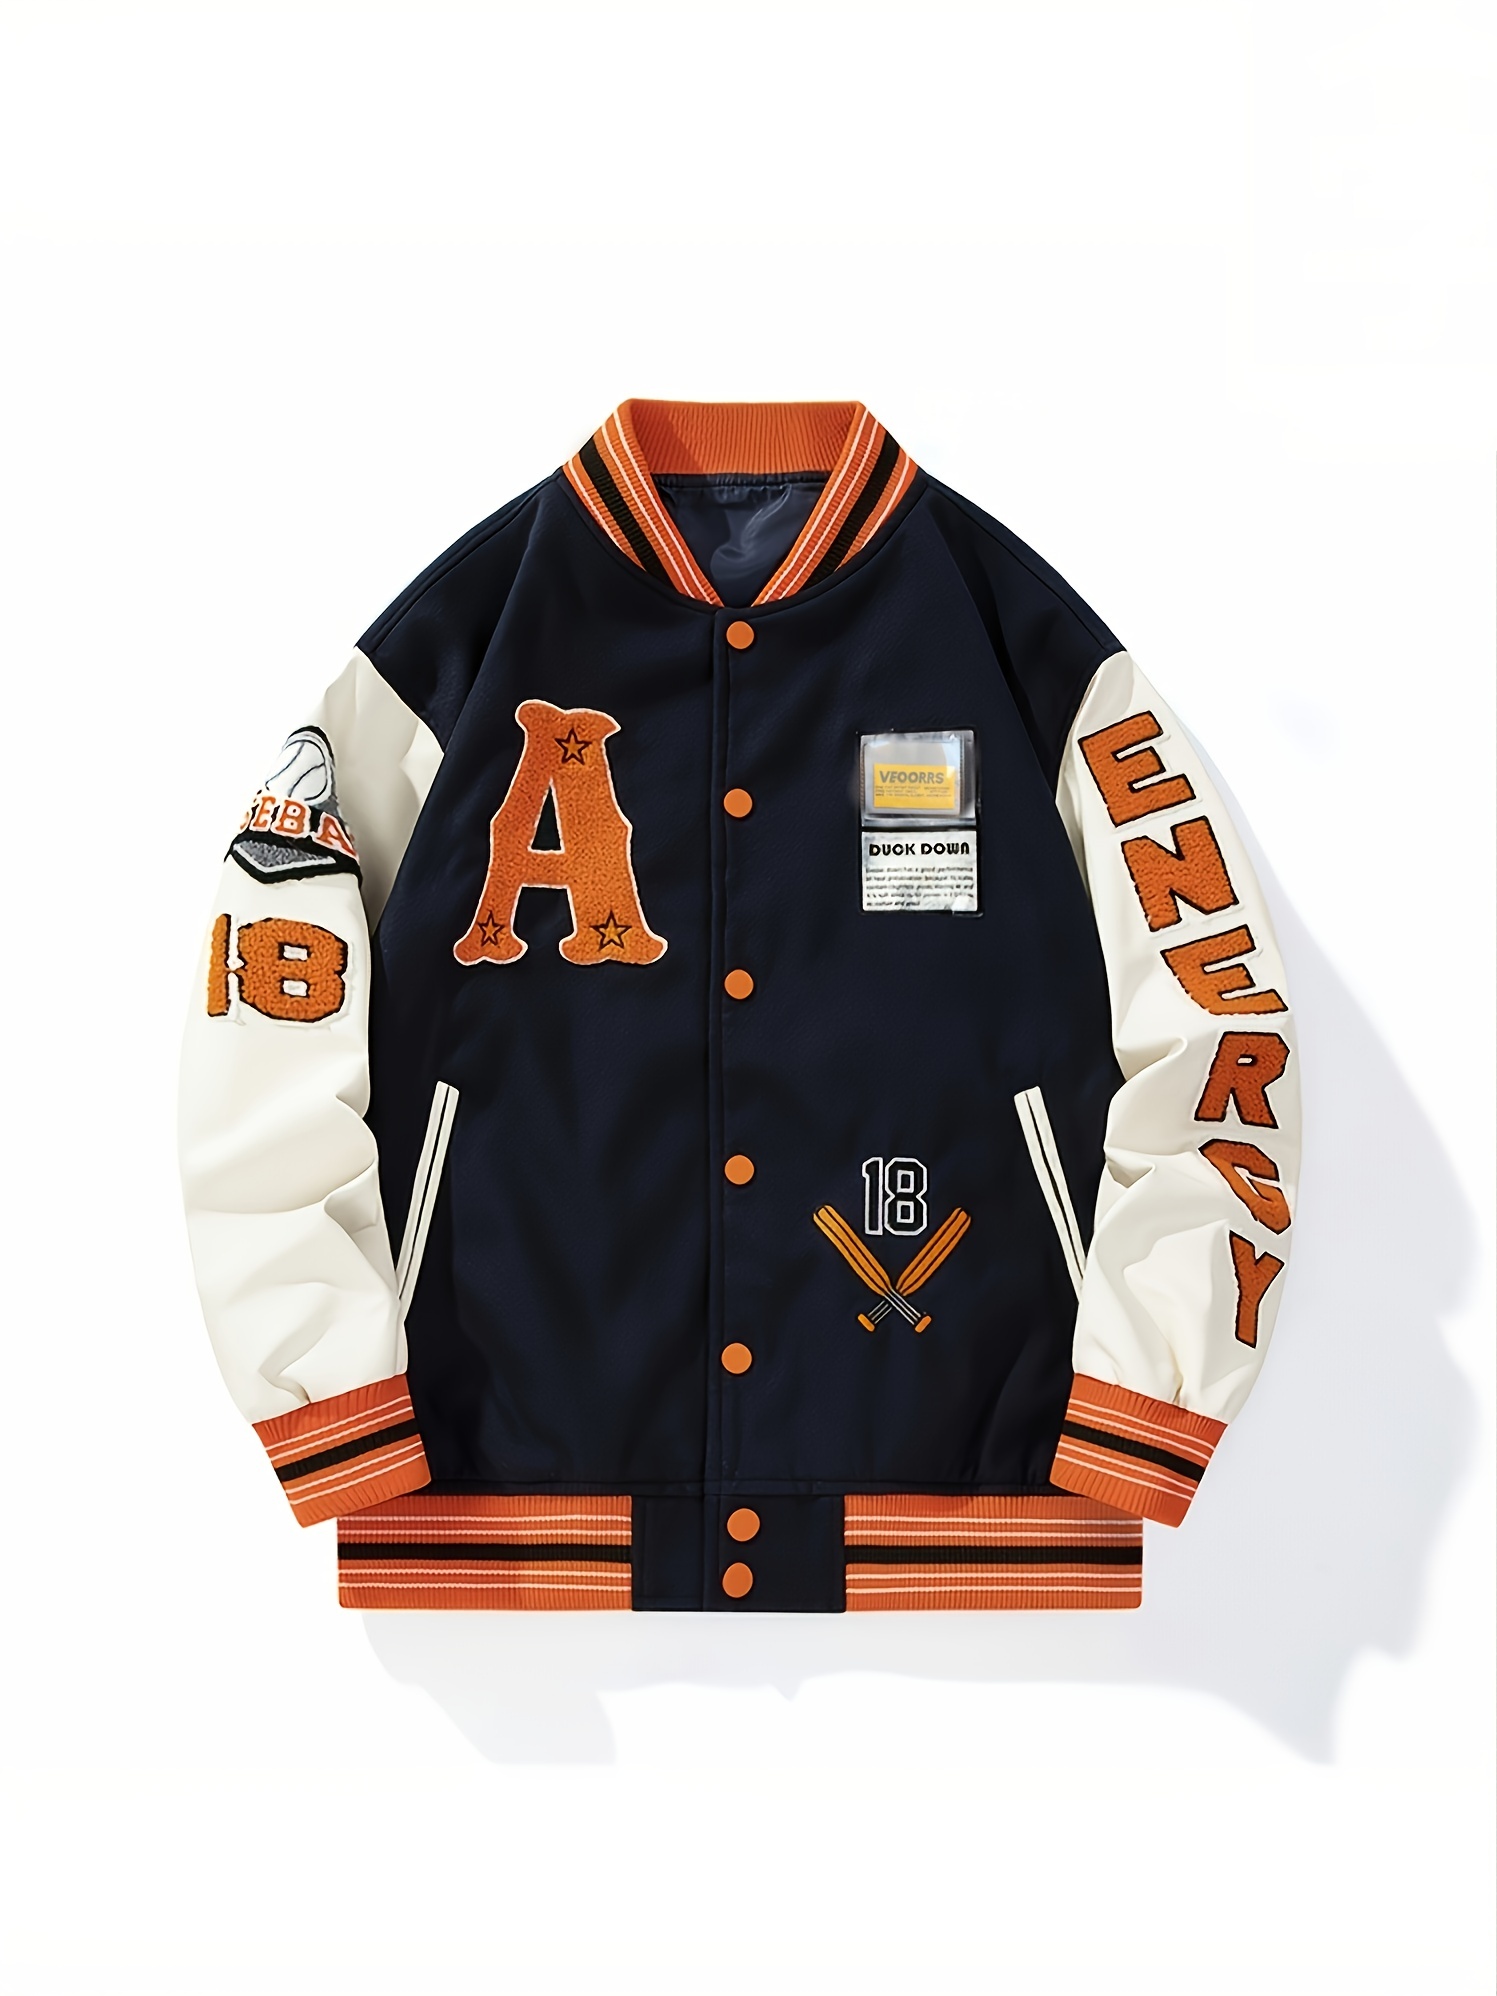 Men's Casual Baseball Jacket, New Retro Embroidered Print Jacket Best  Sellers